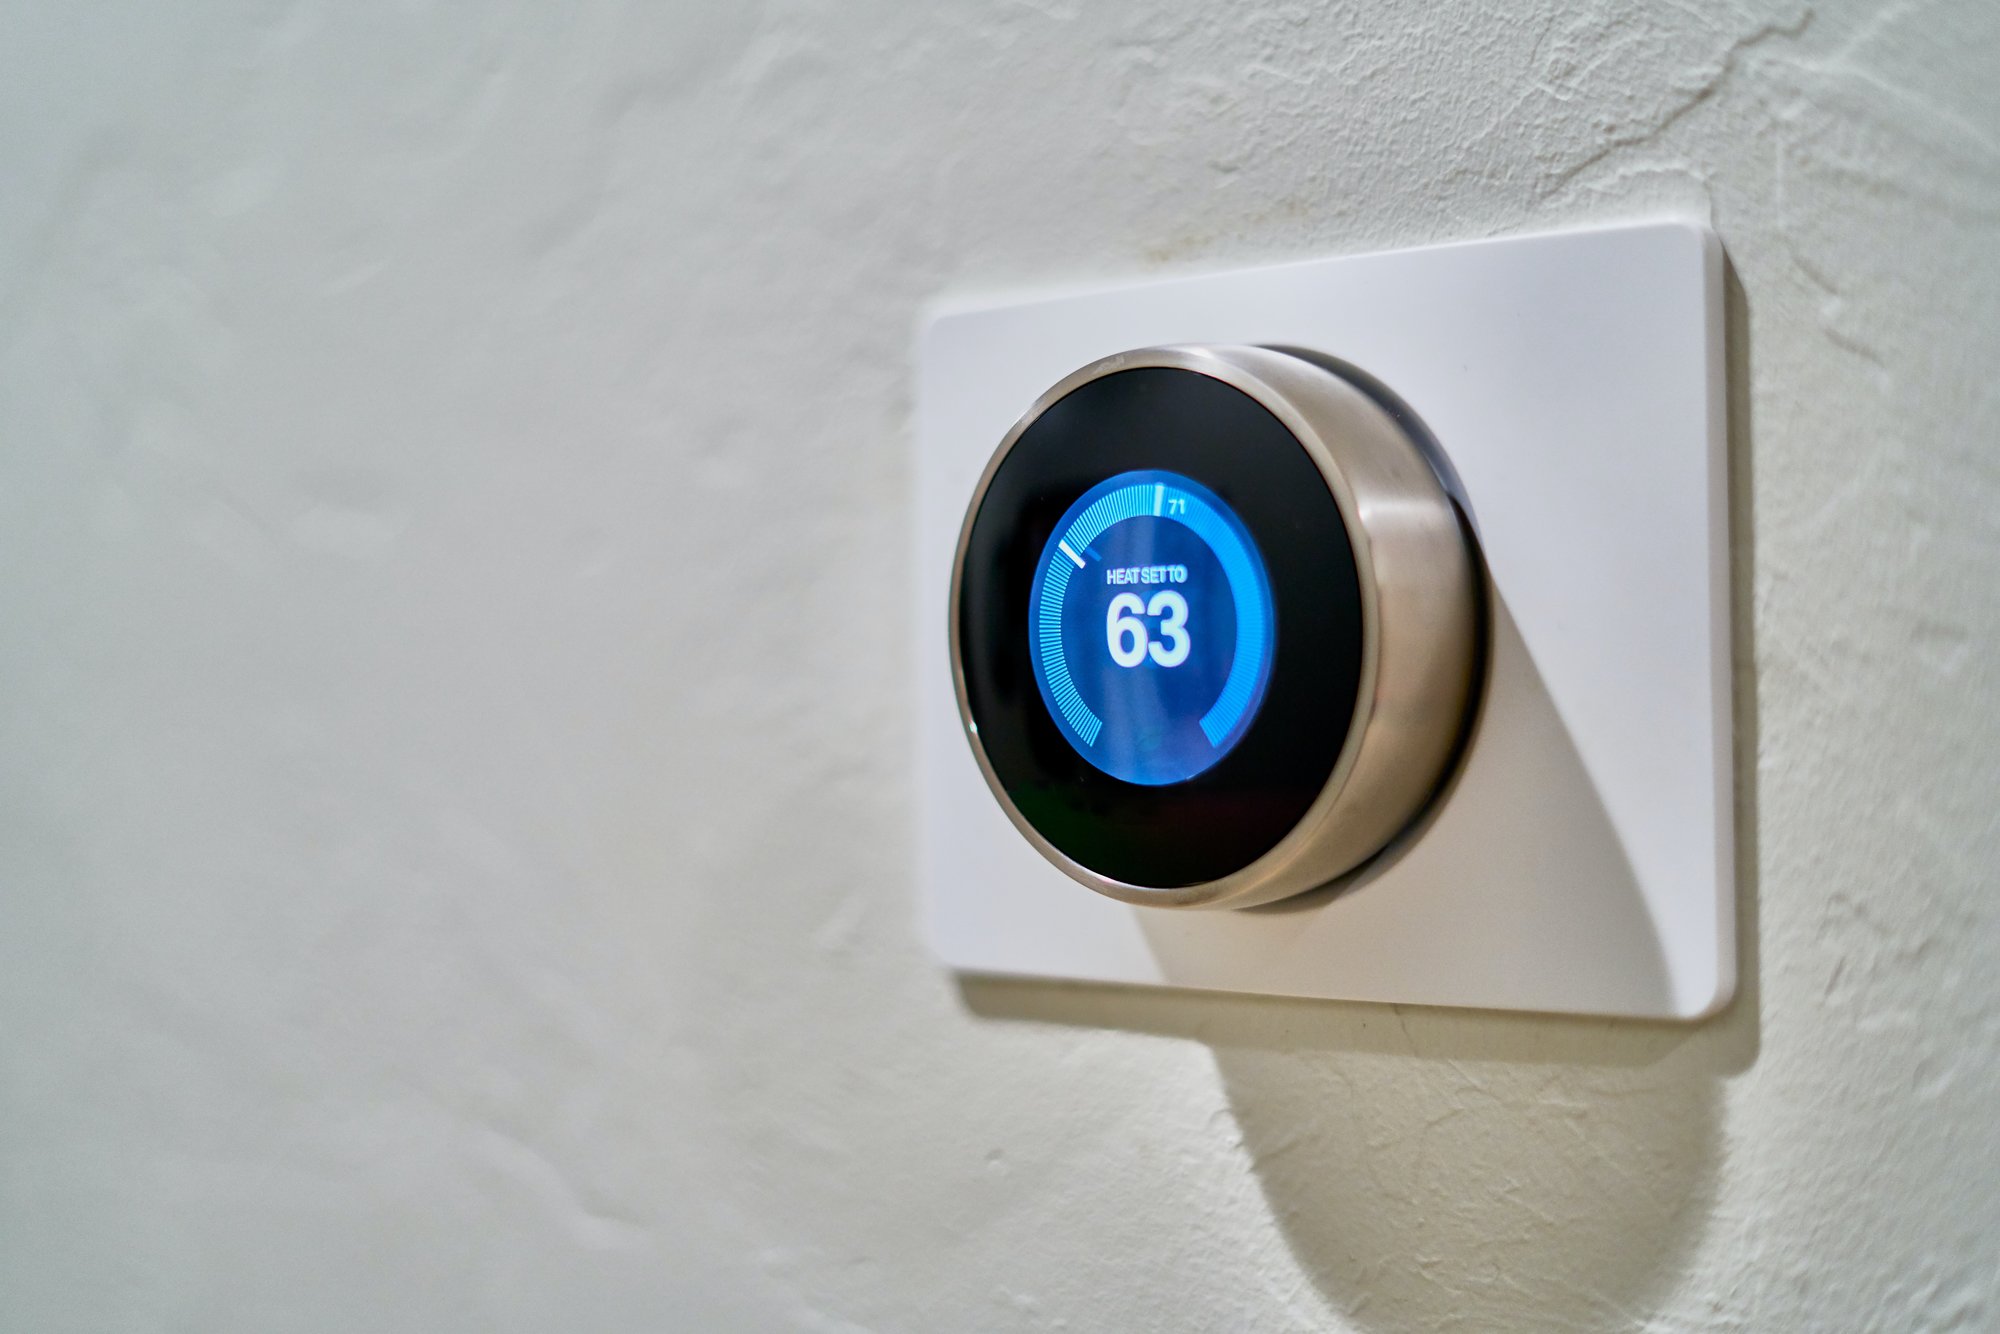 3 Of The Top Rated Smart Thermostats [And Why]